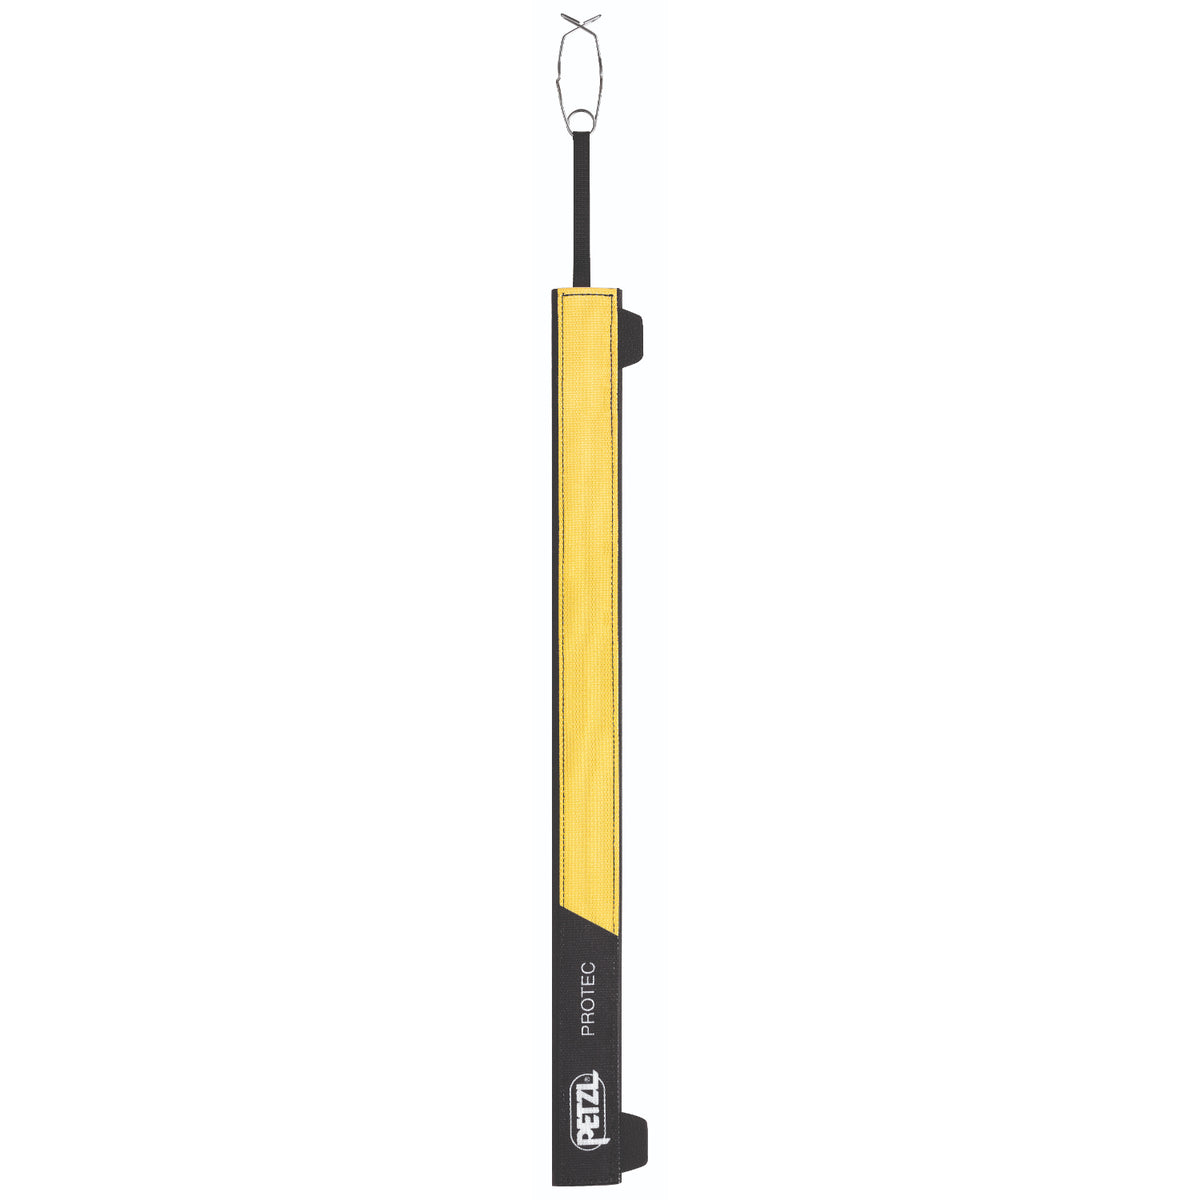 Petzl Rope Protector in yellow and black